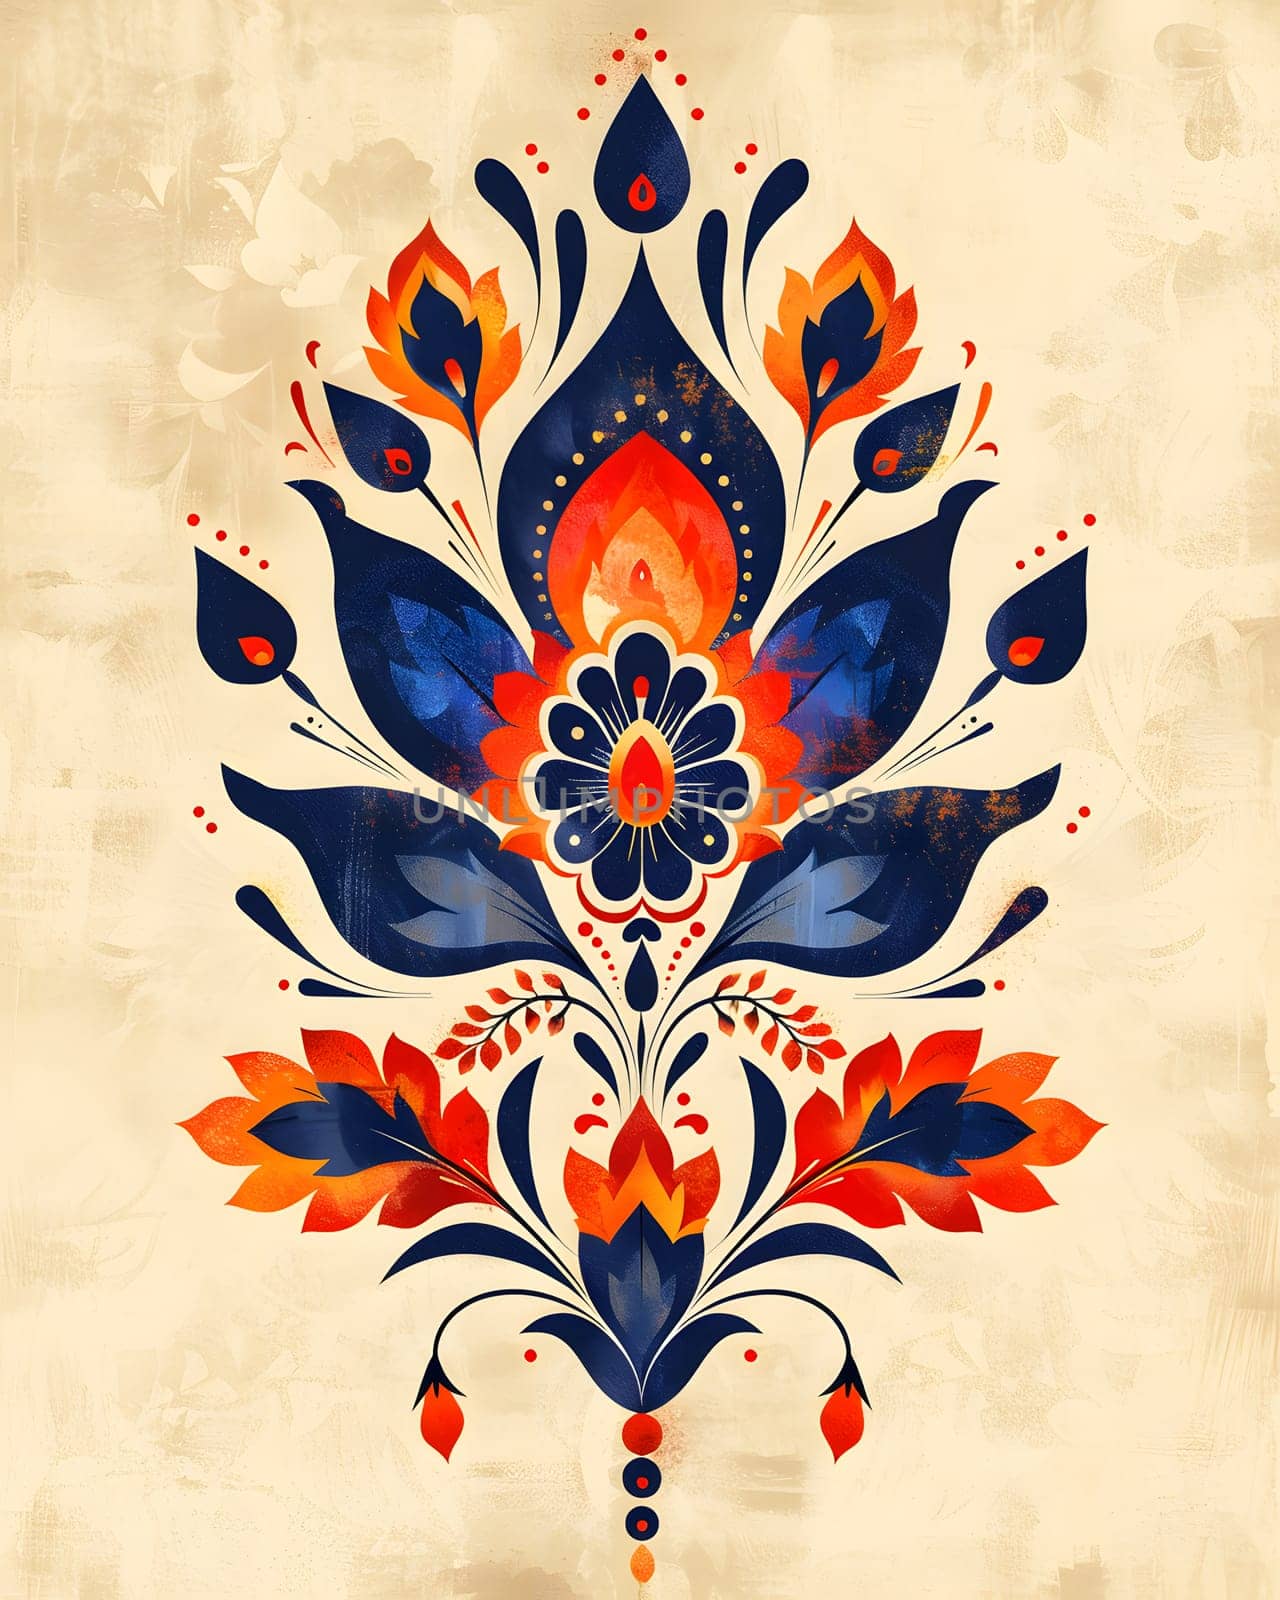 The motif featured in this artwork is a vibrant blue and orange floral design set against a neutral beige background. The symmetry and pattern create a visually striking and creative piece of art